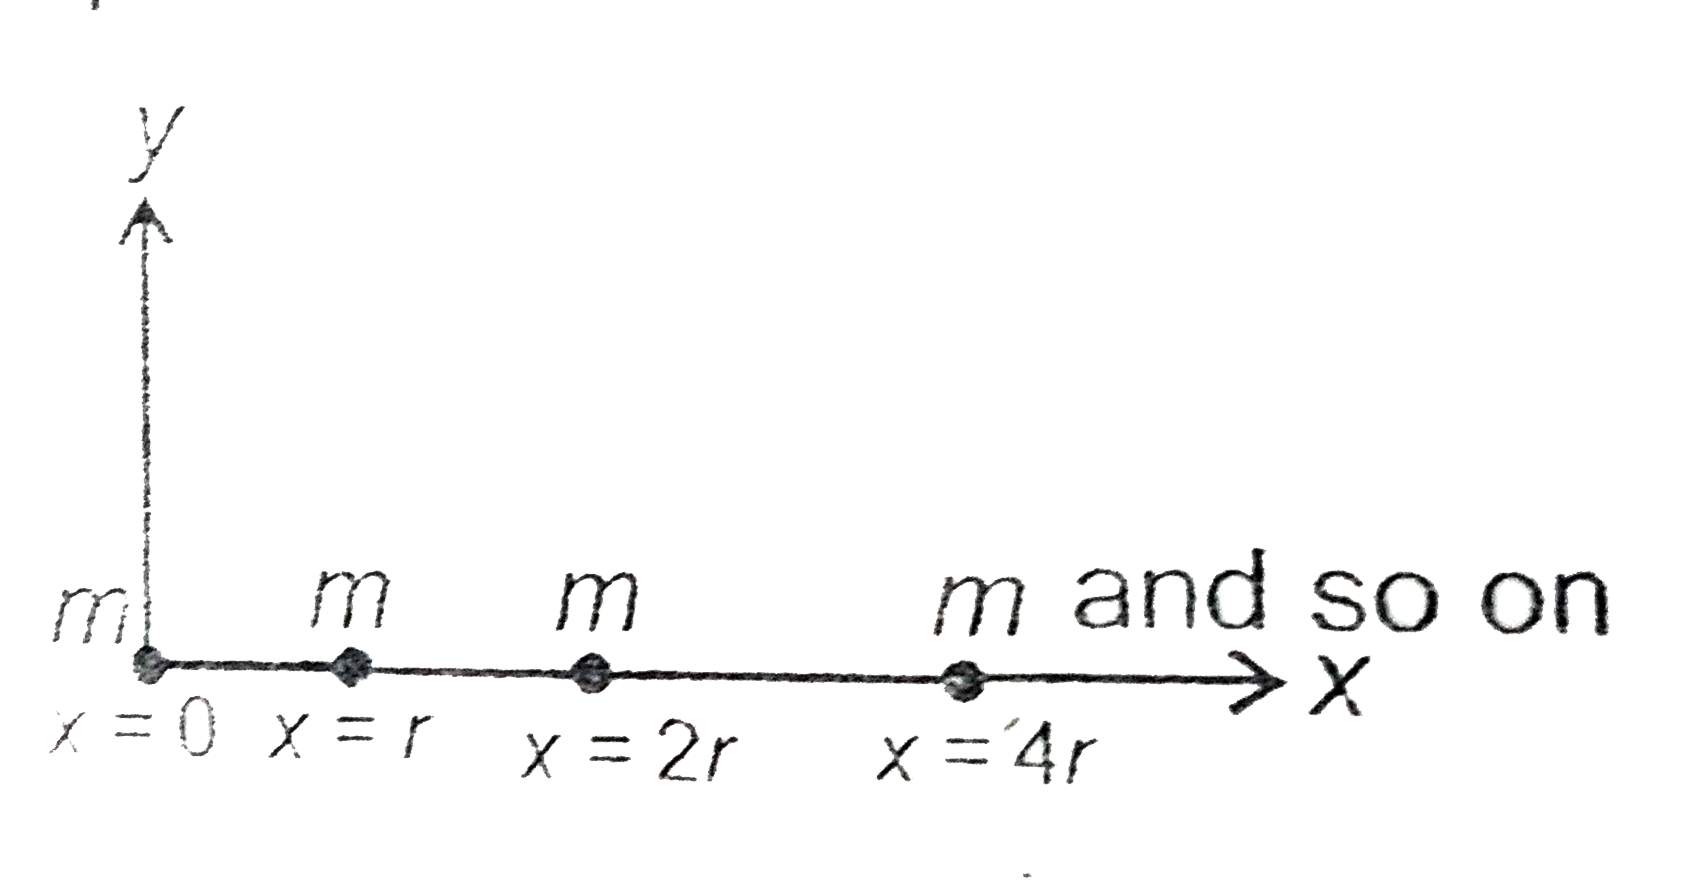 Consider an infinite distribution of point masses (each of mass m) placed on x-axis as shown in the diagram. What is the gravitational force acting on the point mass placed at the origin ?